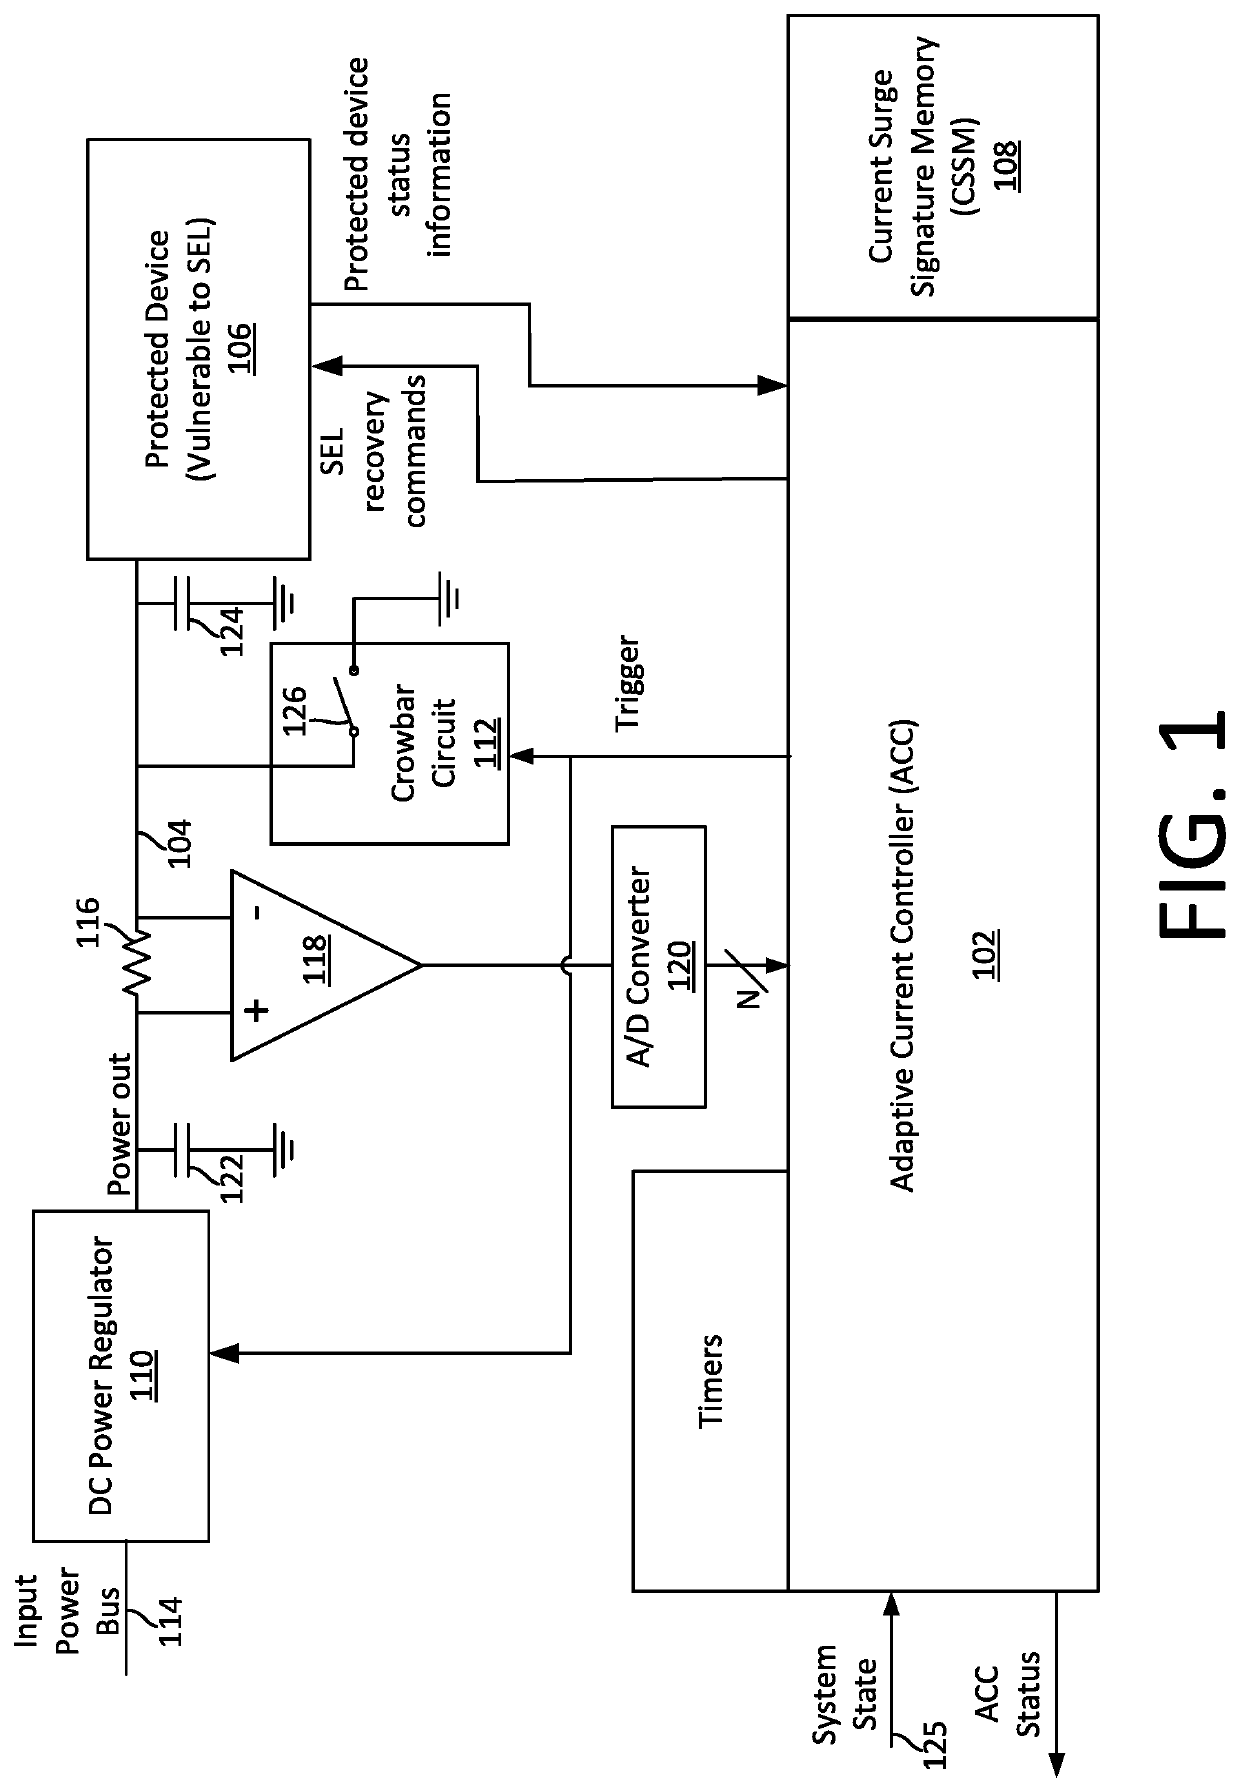 Adaptive single event latchup (SEL) current surge mitigation